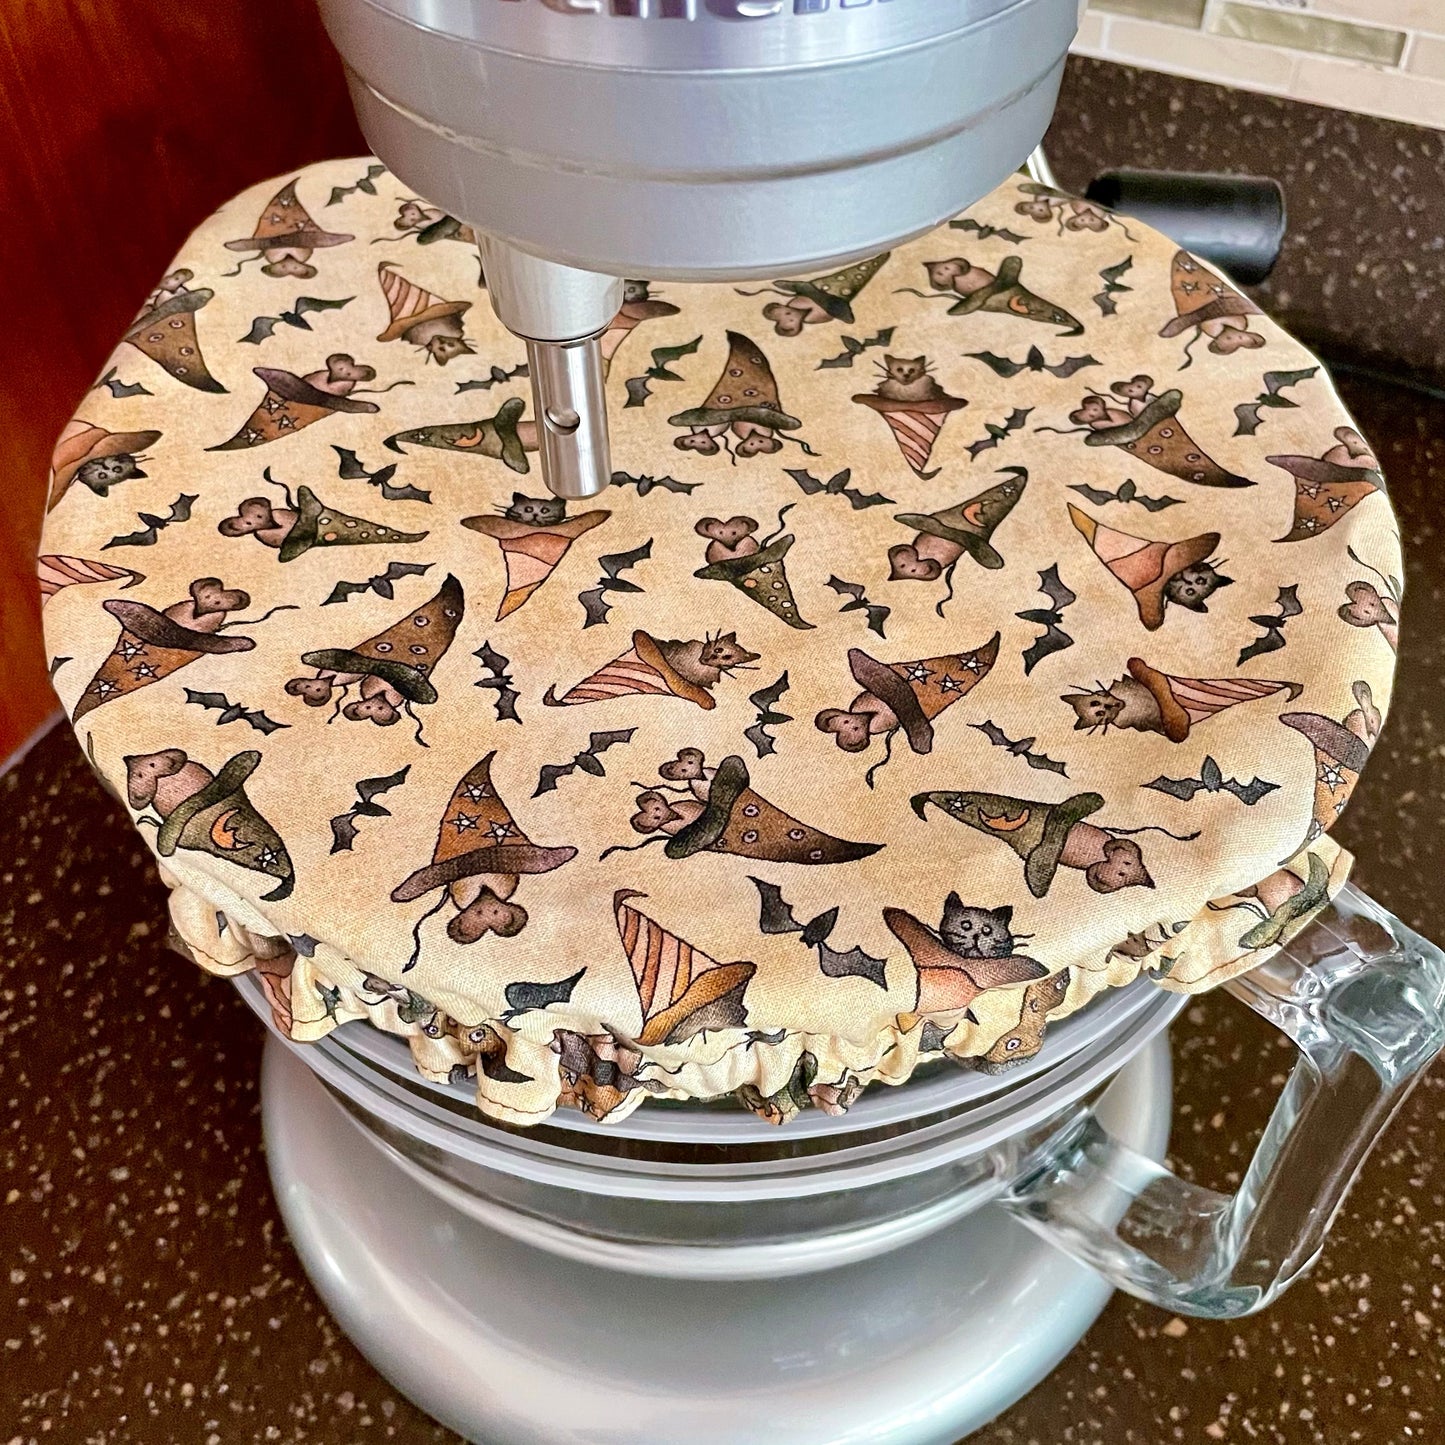 Stand Mixer Bowl Covers - Bats, Cats, and Mice